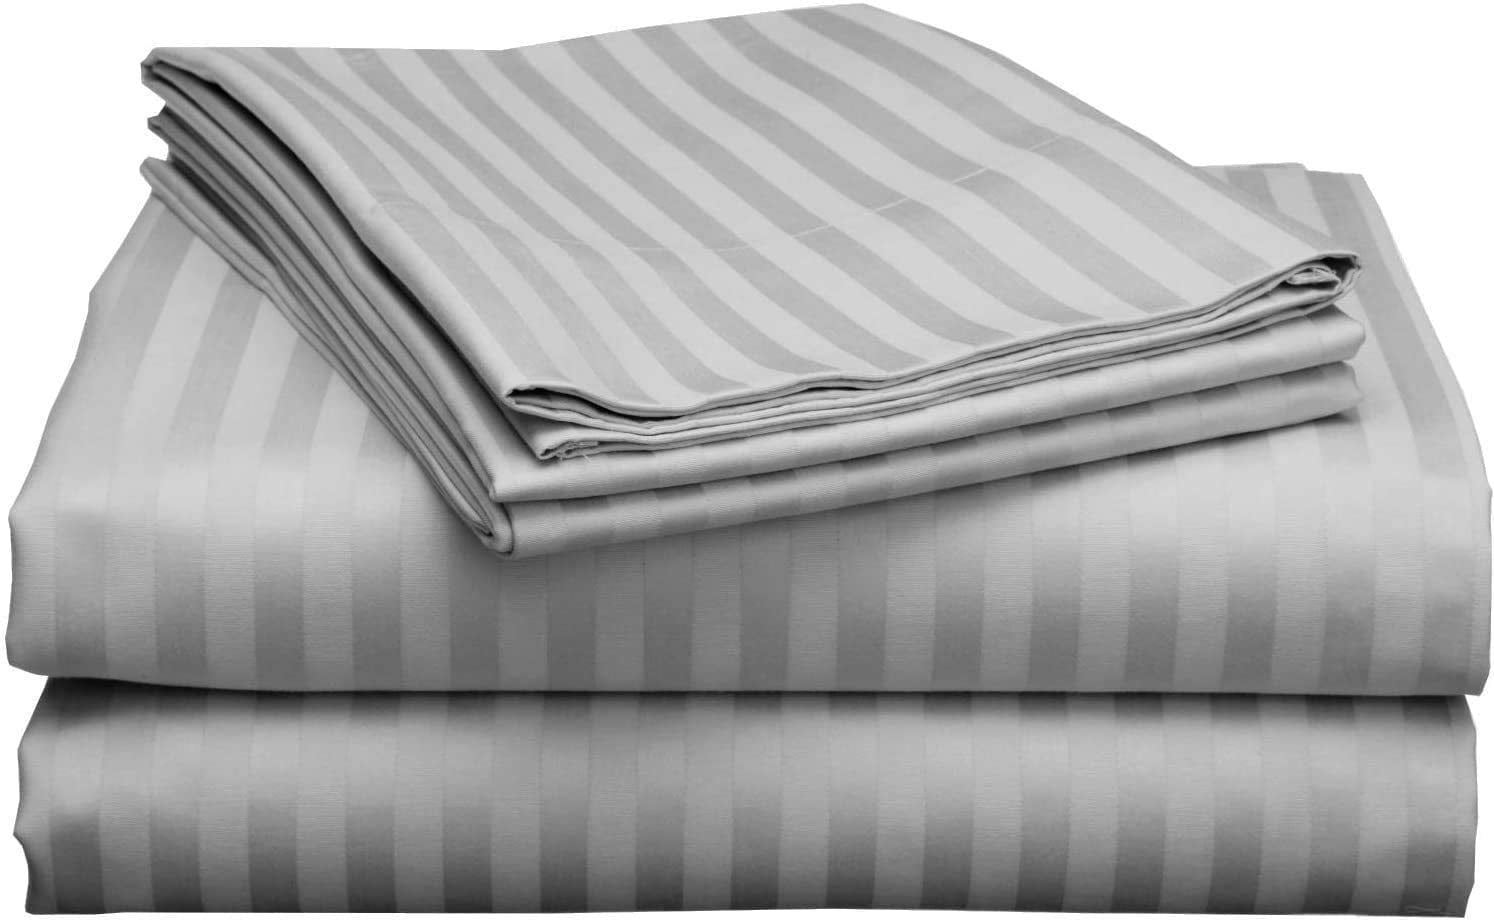 100% EGYPTIAN COTTON PURE 400 800 THREAD SATIN STRIPE FITTED SHEET HOTEL QUALITY 